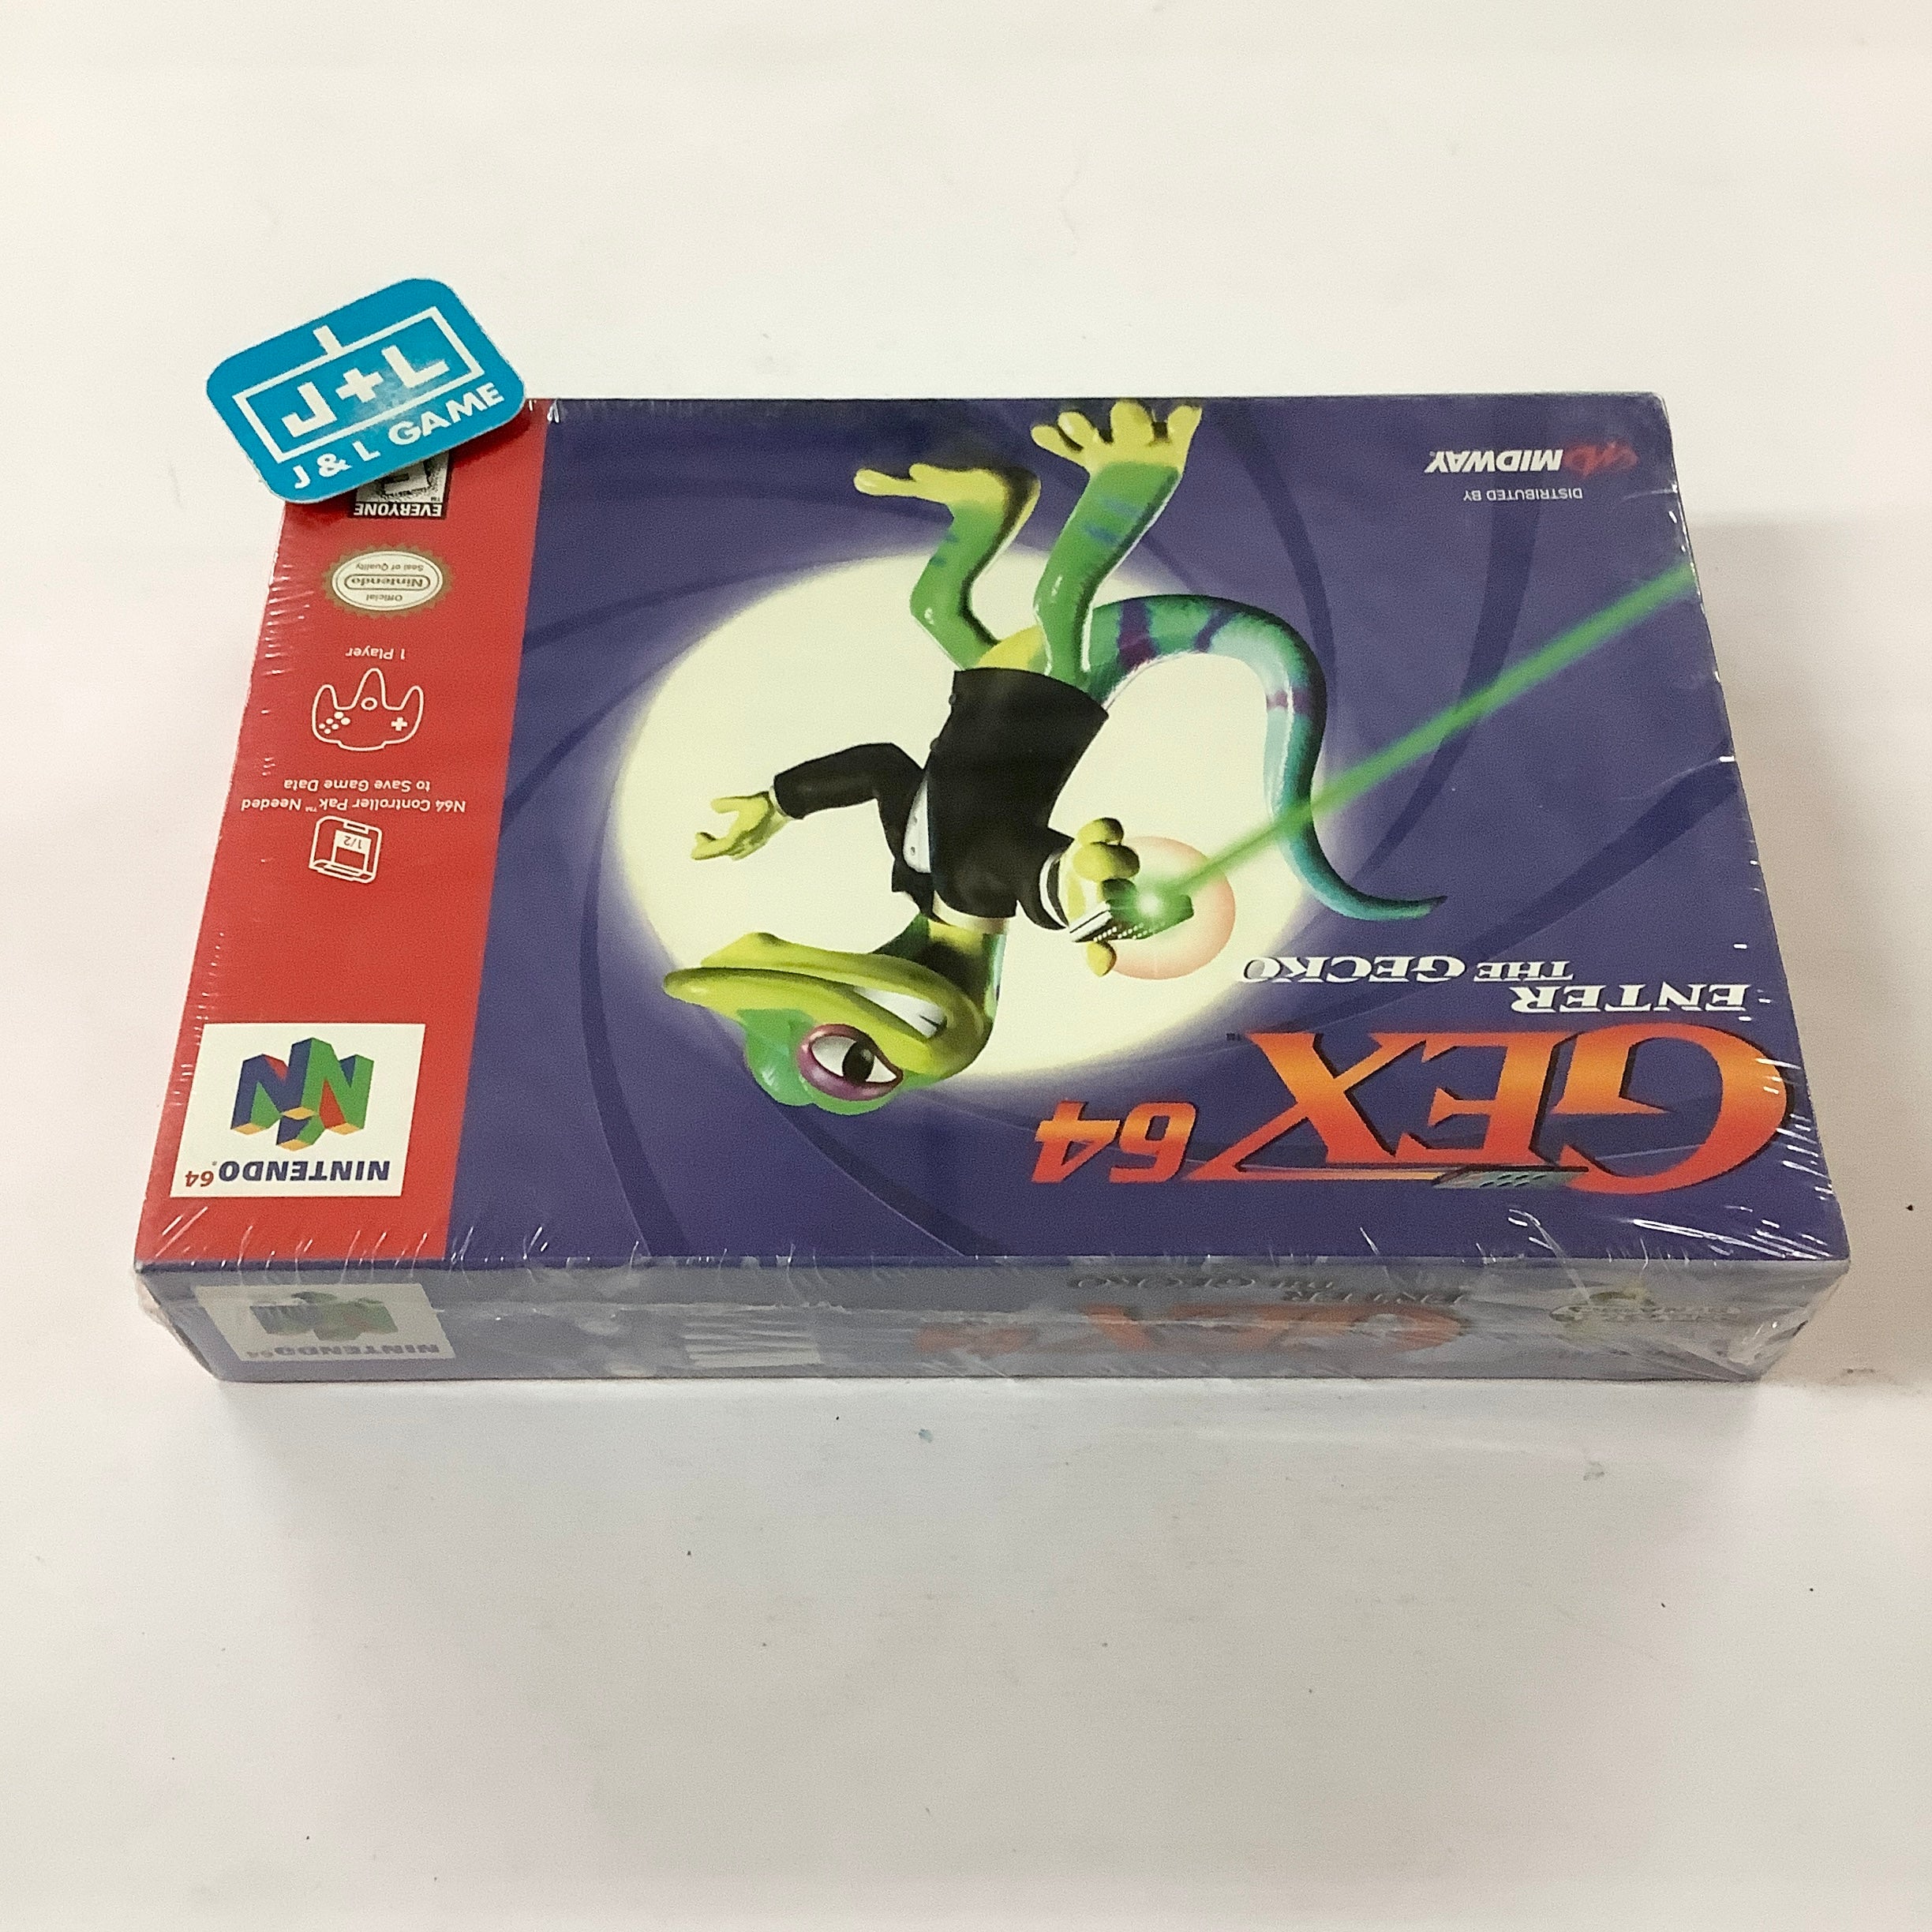 Gex 64: Enter the Gecko - (N64) Nintendo 64 Video Games Midway   